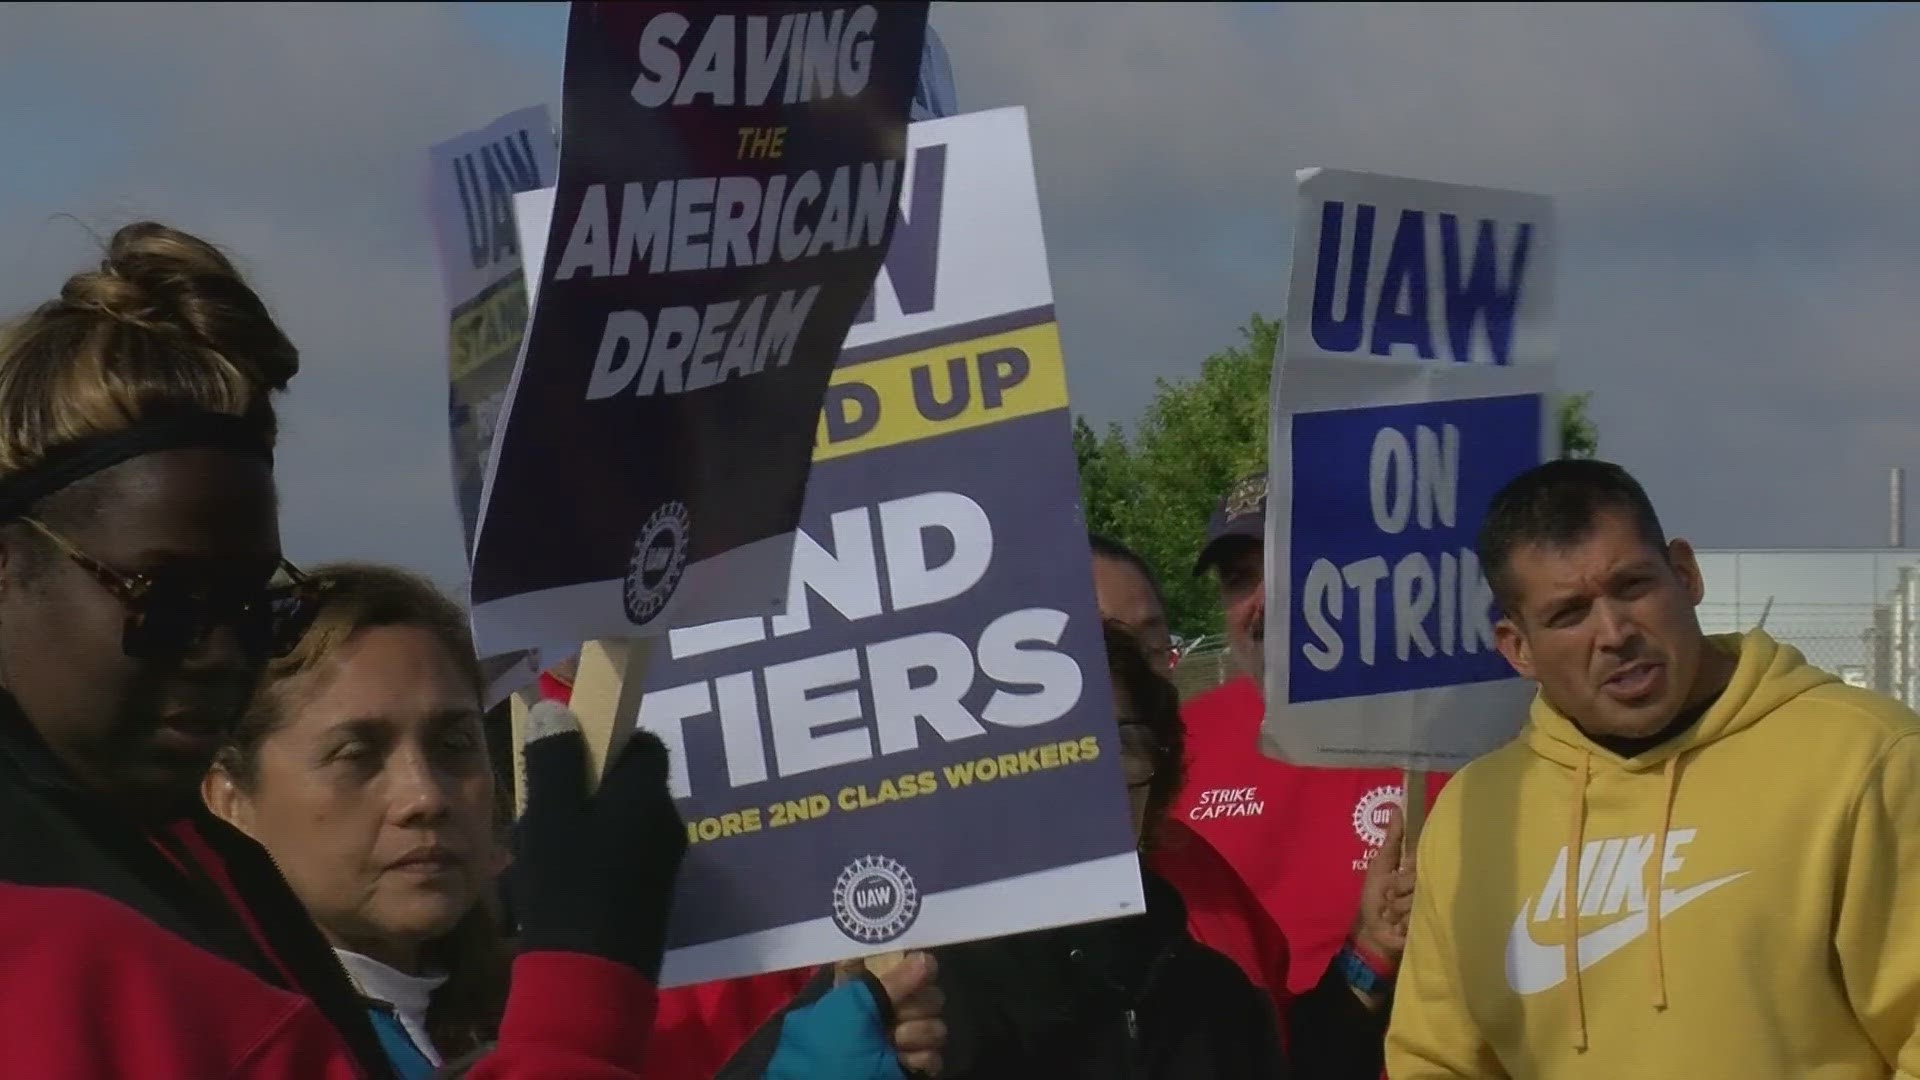 WTOL 11 Reporter Michael Sandlin spoke with UAW Local 12 members at the picket line as the strike continues into its fourth day.